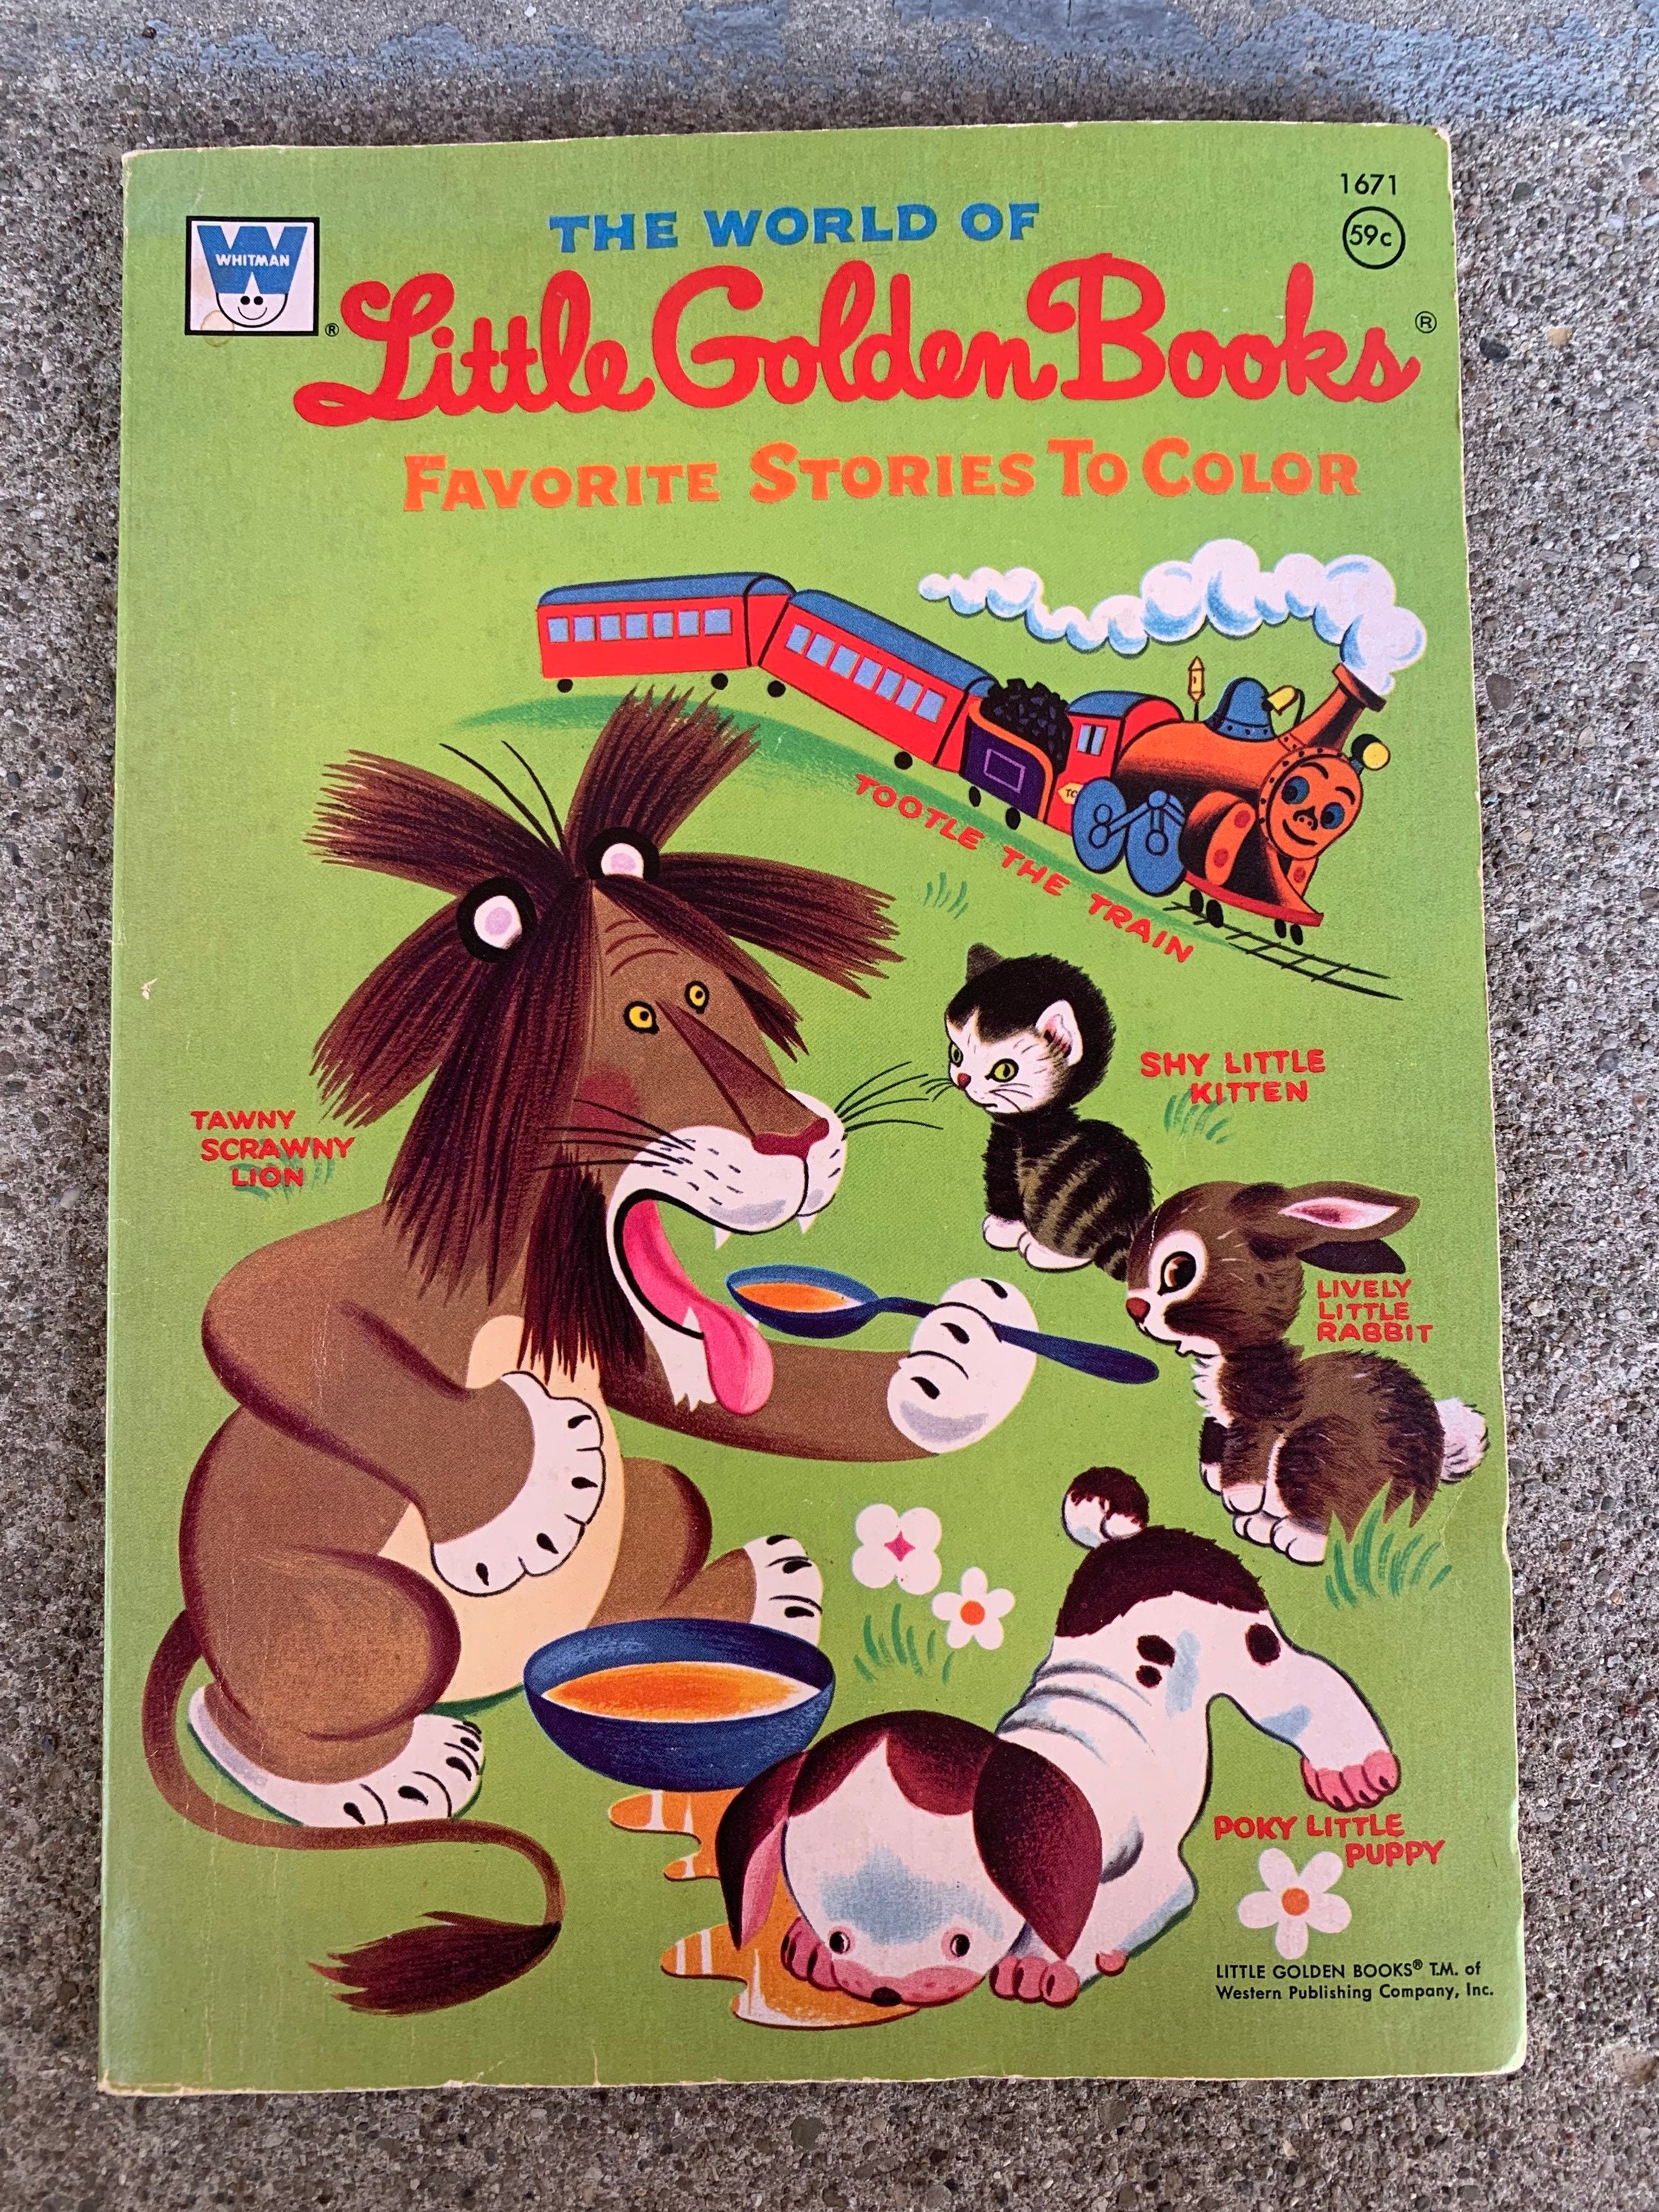 Coloring　Little　Golden　Books　Vintage　Etsy　Canada　Unused　Book